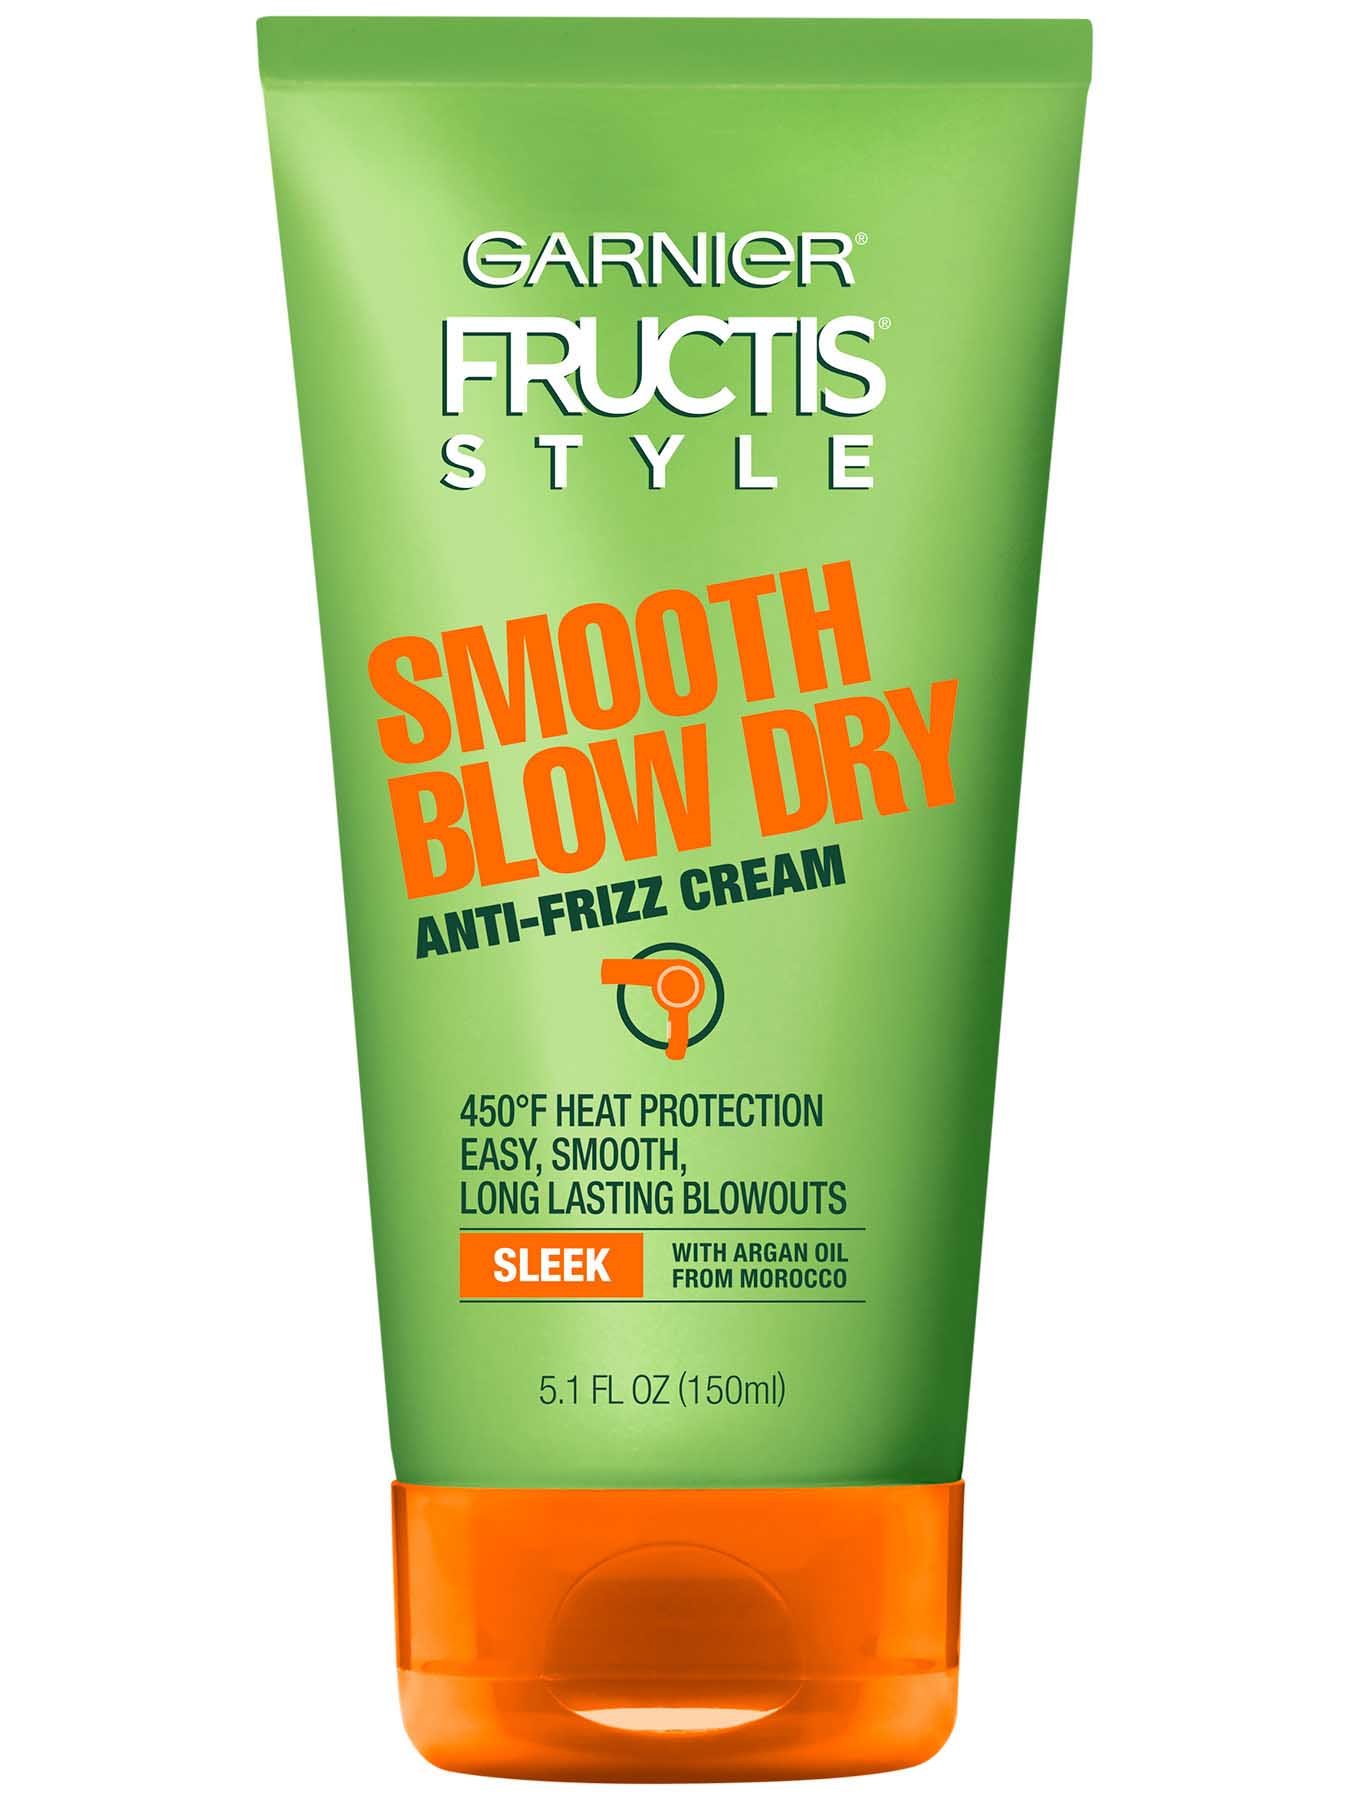 Front view of Smooth Blow Dry Anti-Frizz Cream.